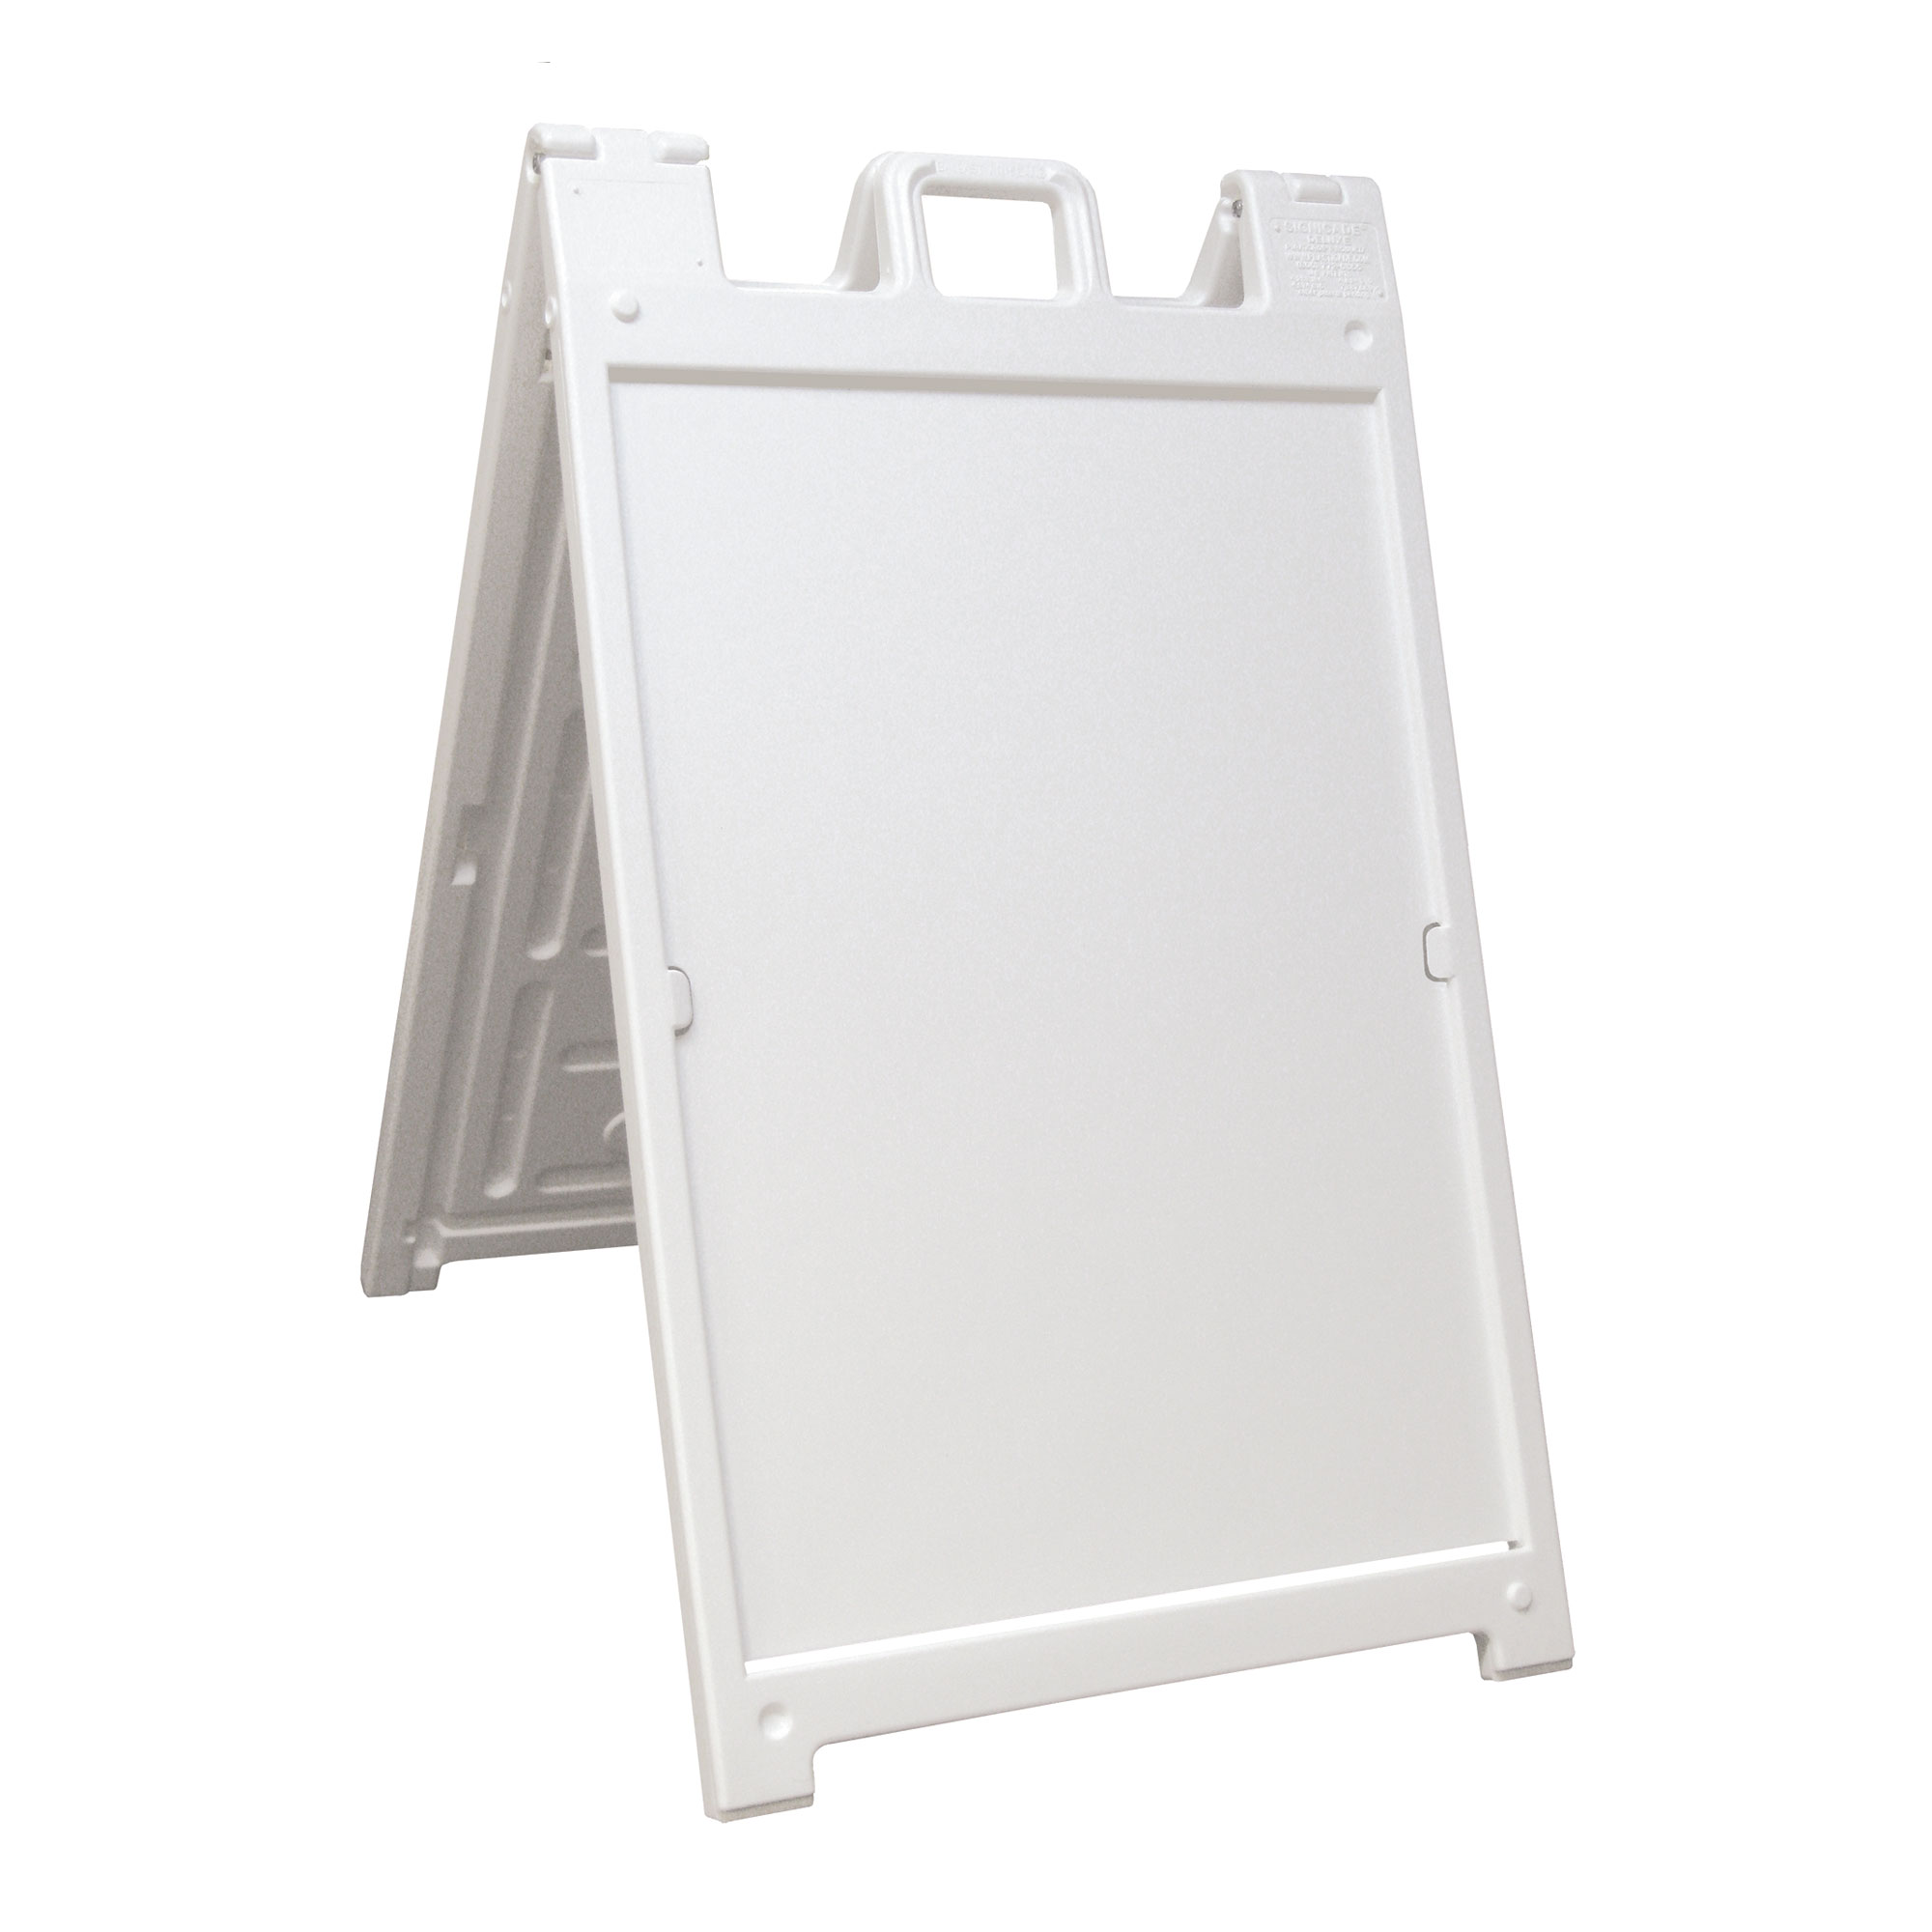 Plasticade Deluxe Signicade Portable Folding Double Sided Sign, White 